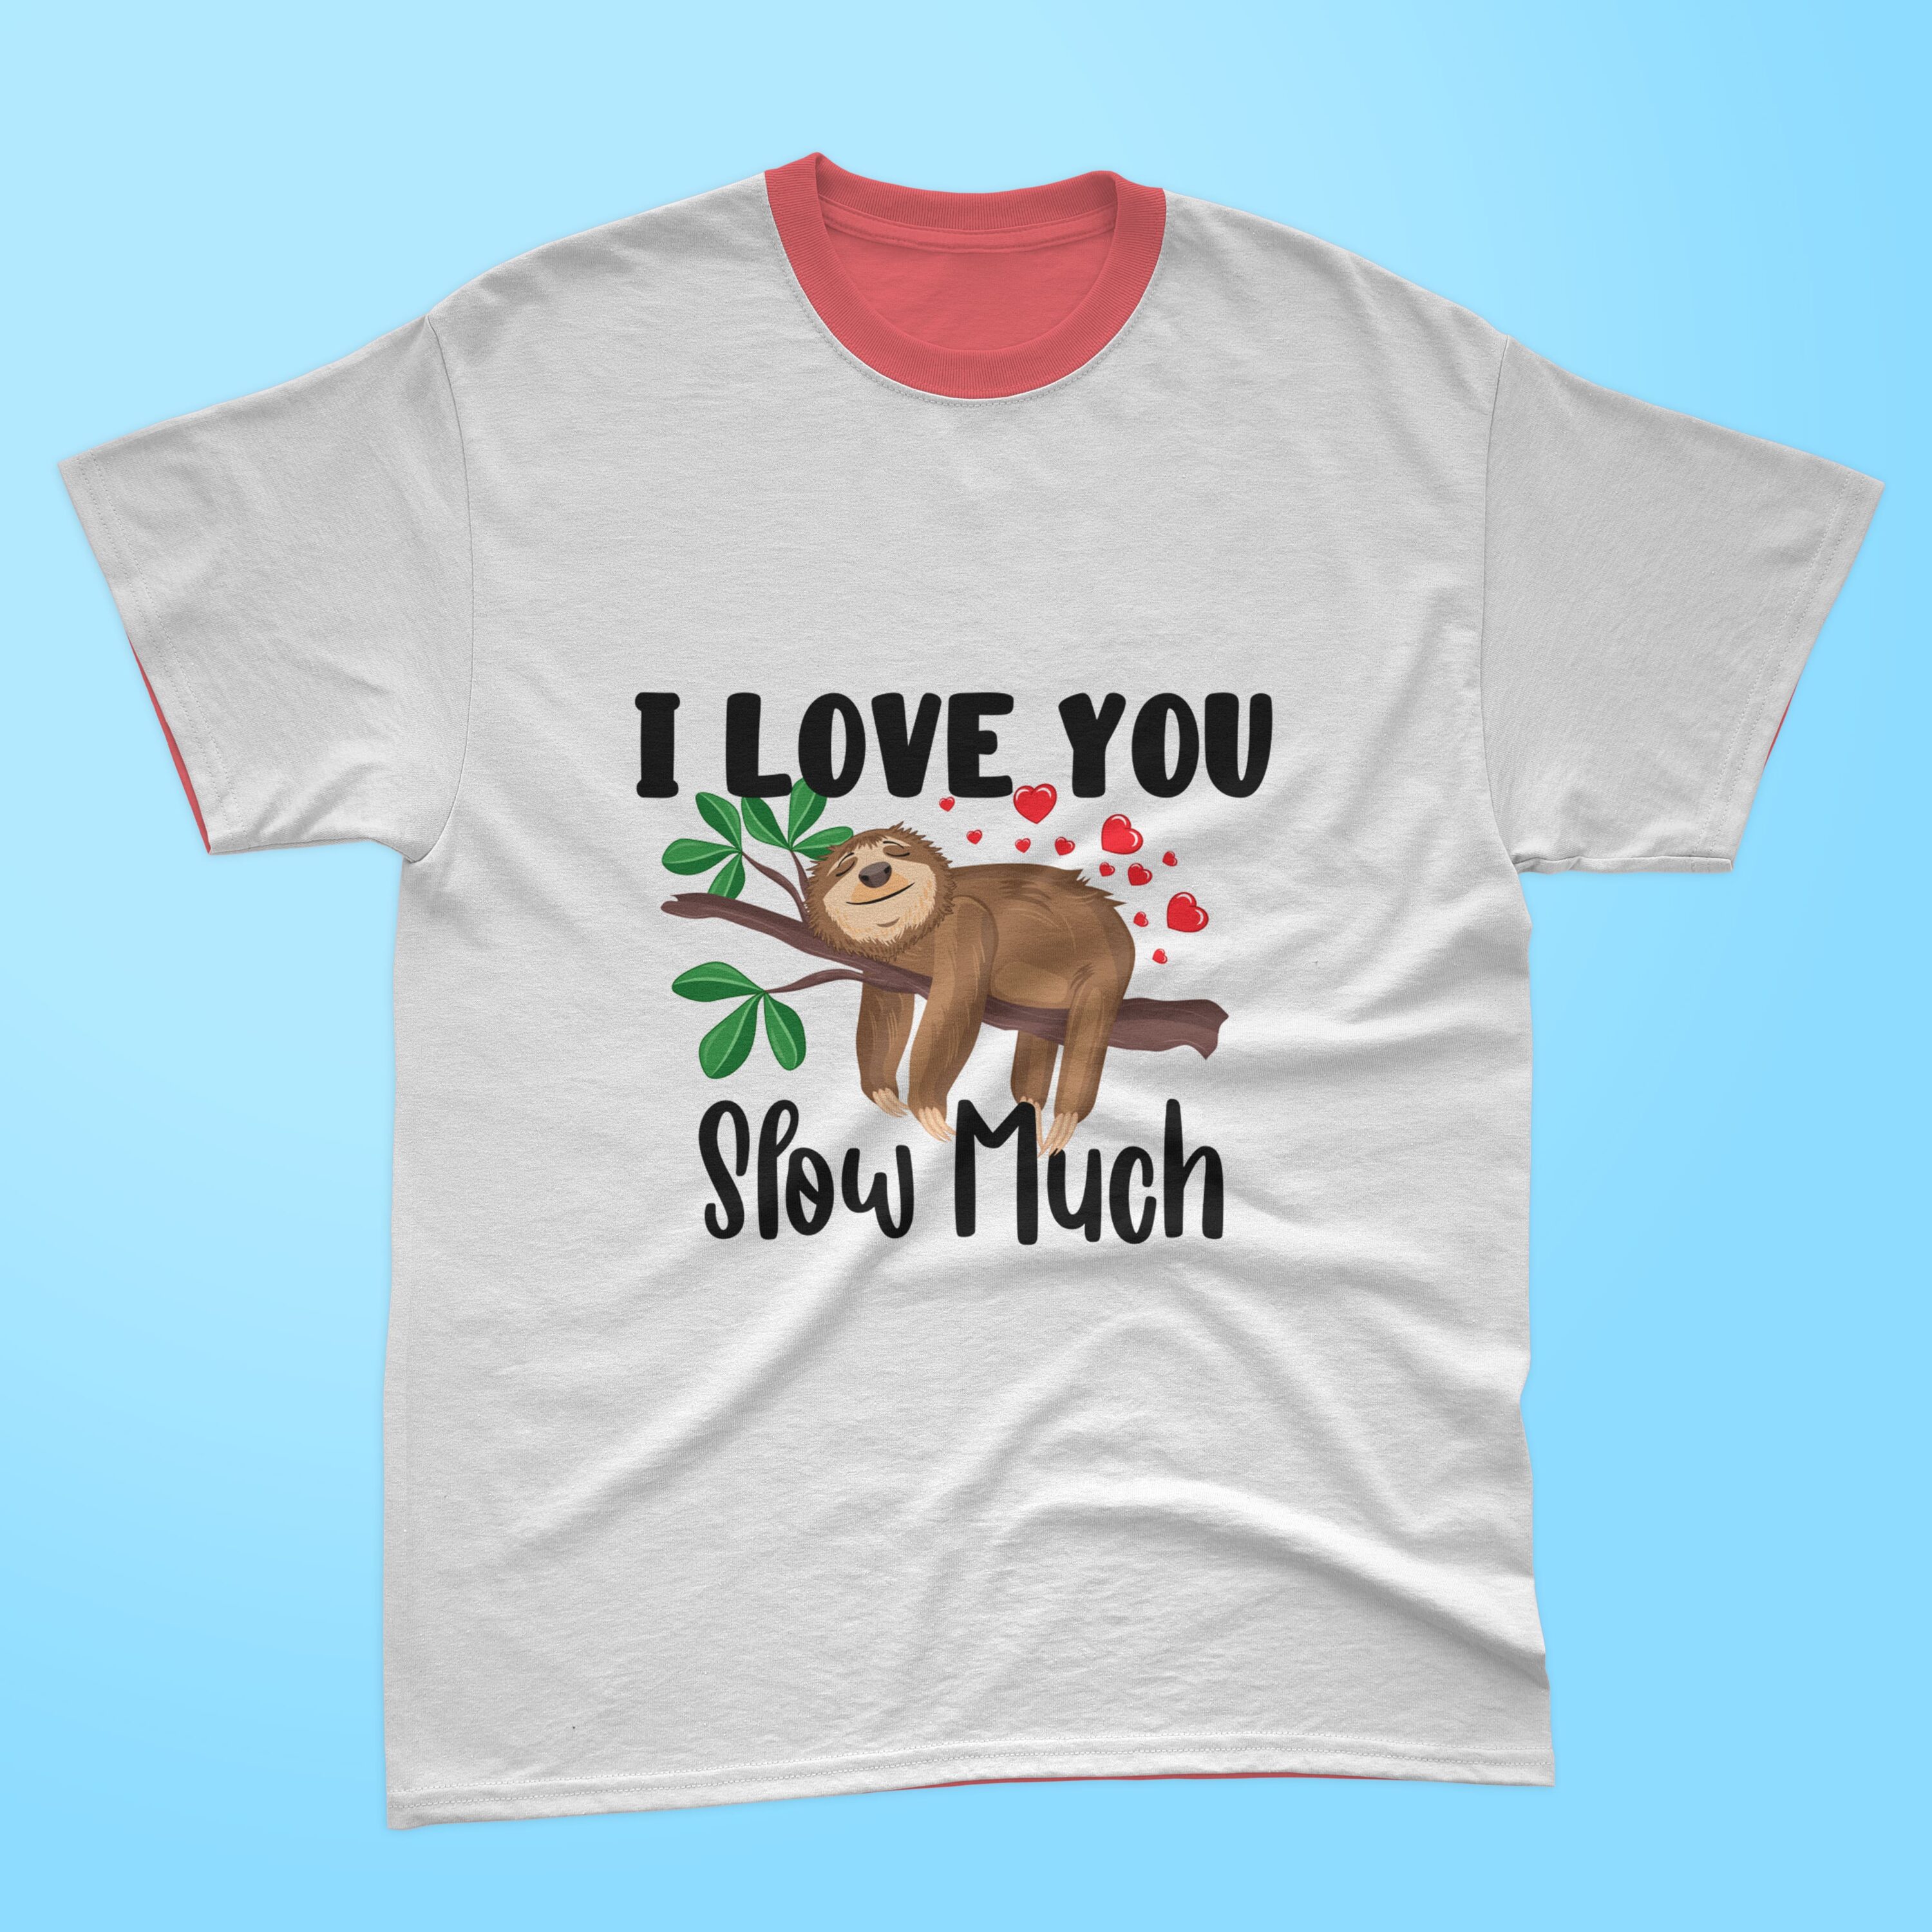 Picture of white t-shirt with exquisite sloth print and "I love you" slogan.